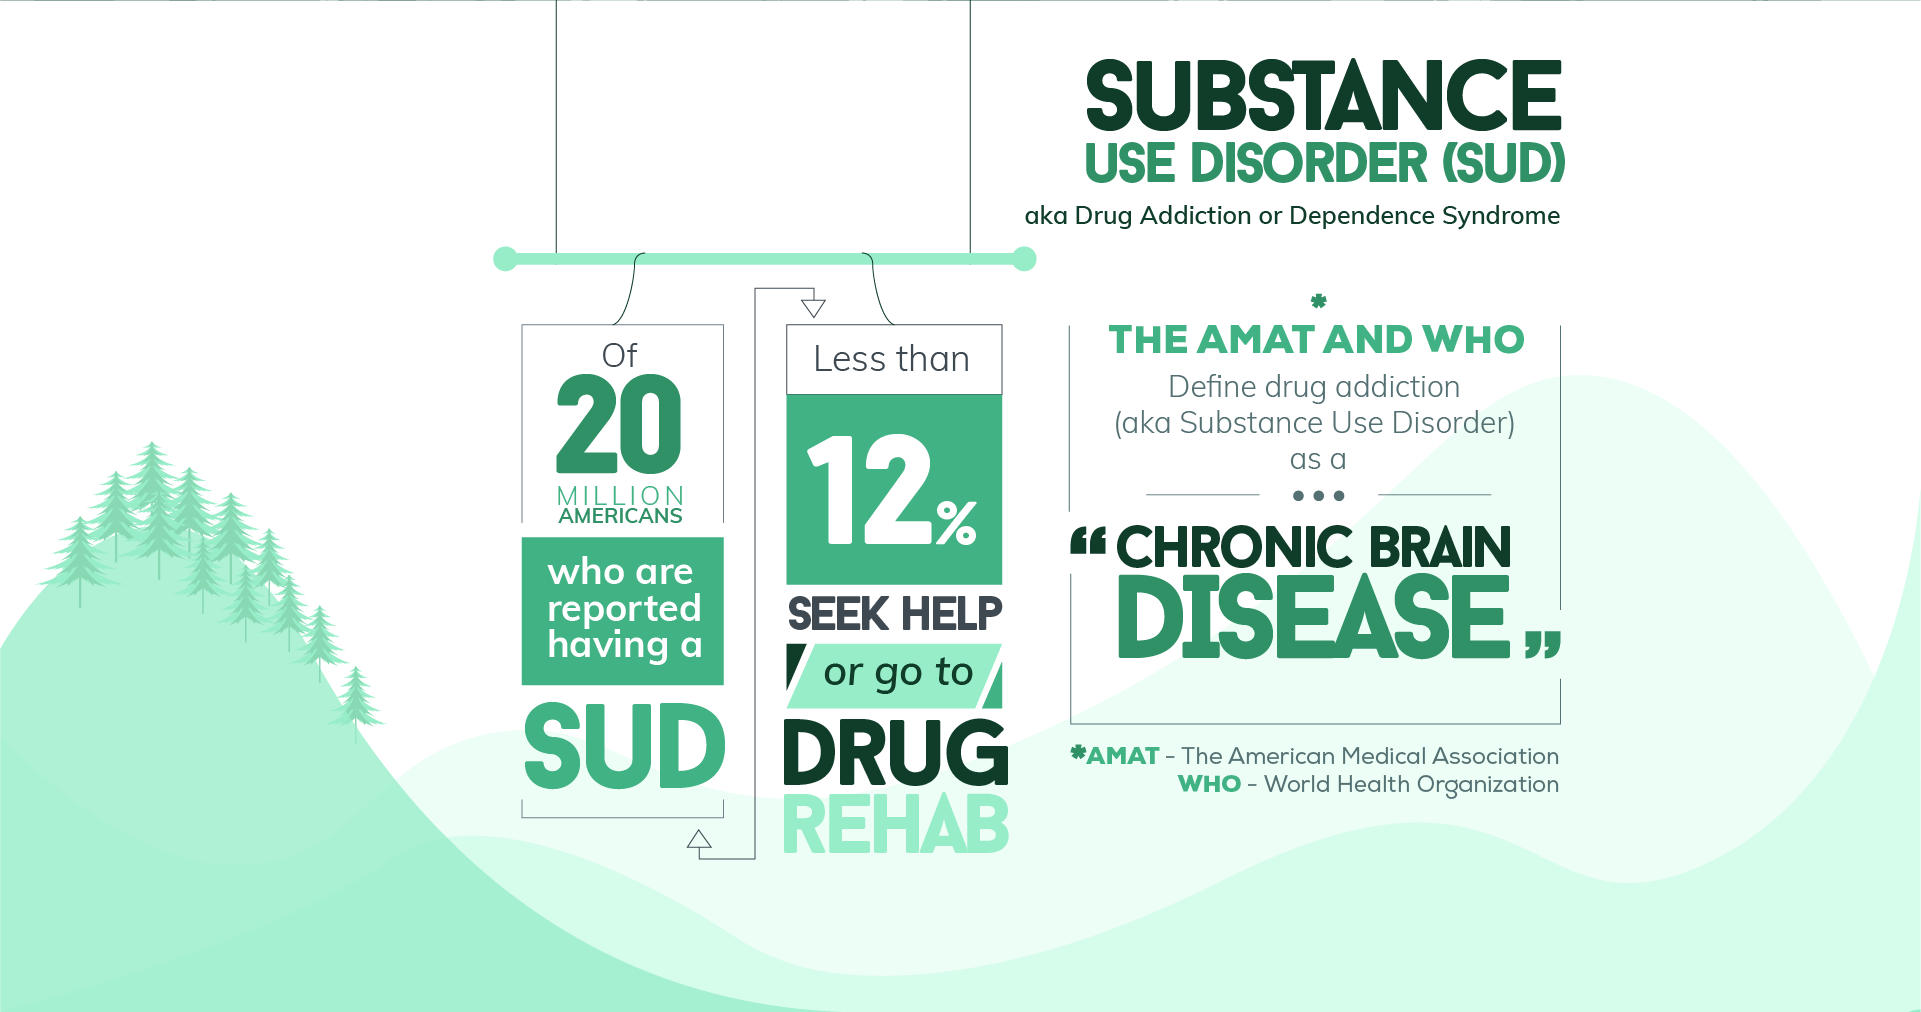 Is Substance Use Disorder Really a Thing?